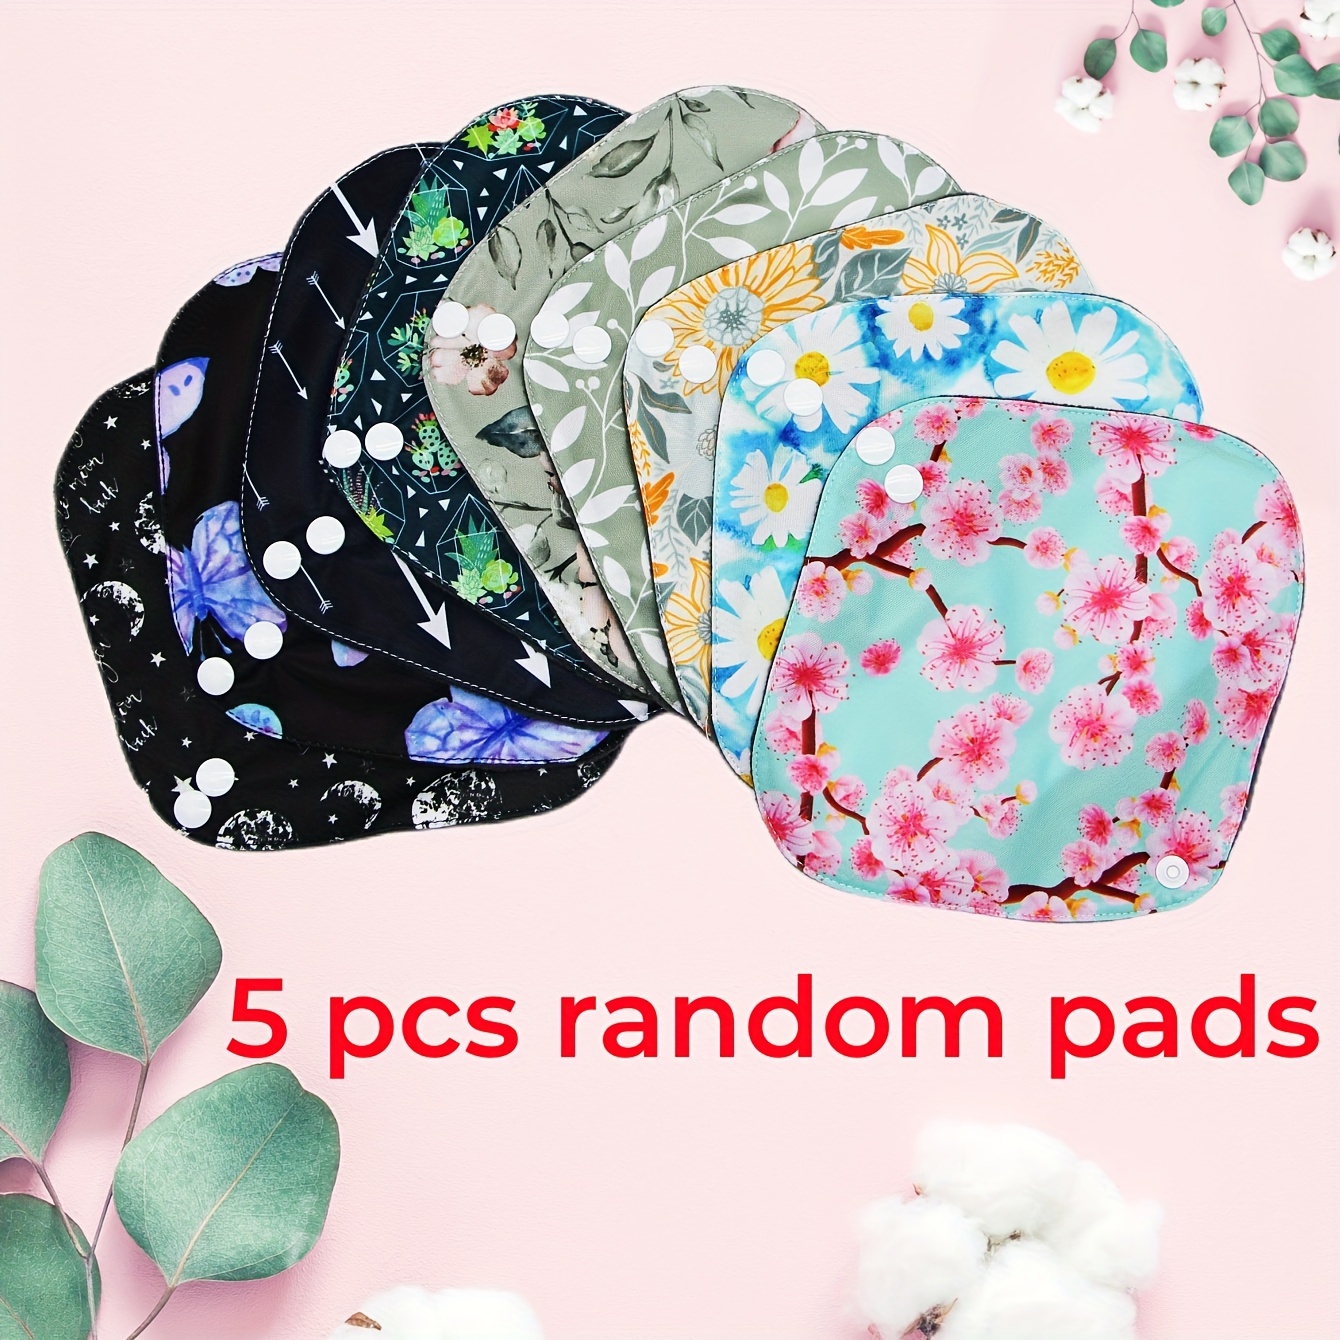 6 in 1 Reusable Menstrual Pads,5 PCs Sanitary Pad Set with Wings Waterproof  Washable Sanitary Menstrual Cloth Pads Panty Liners for Women